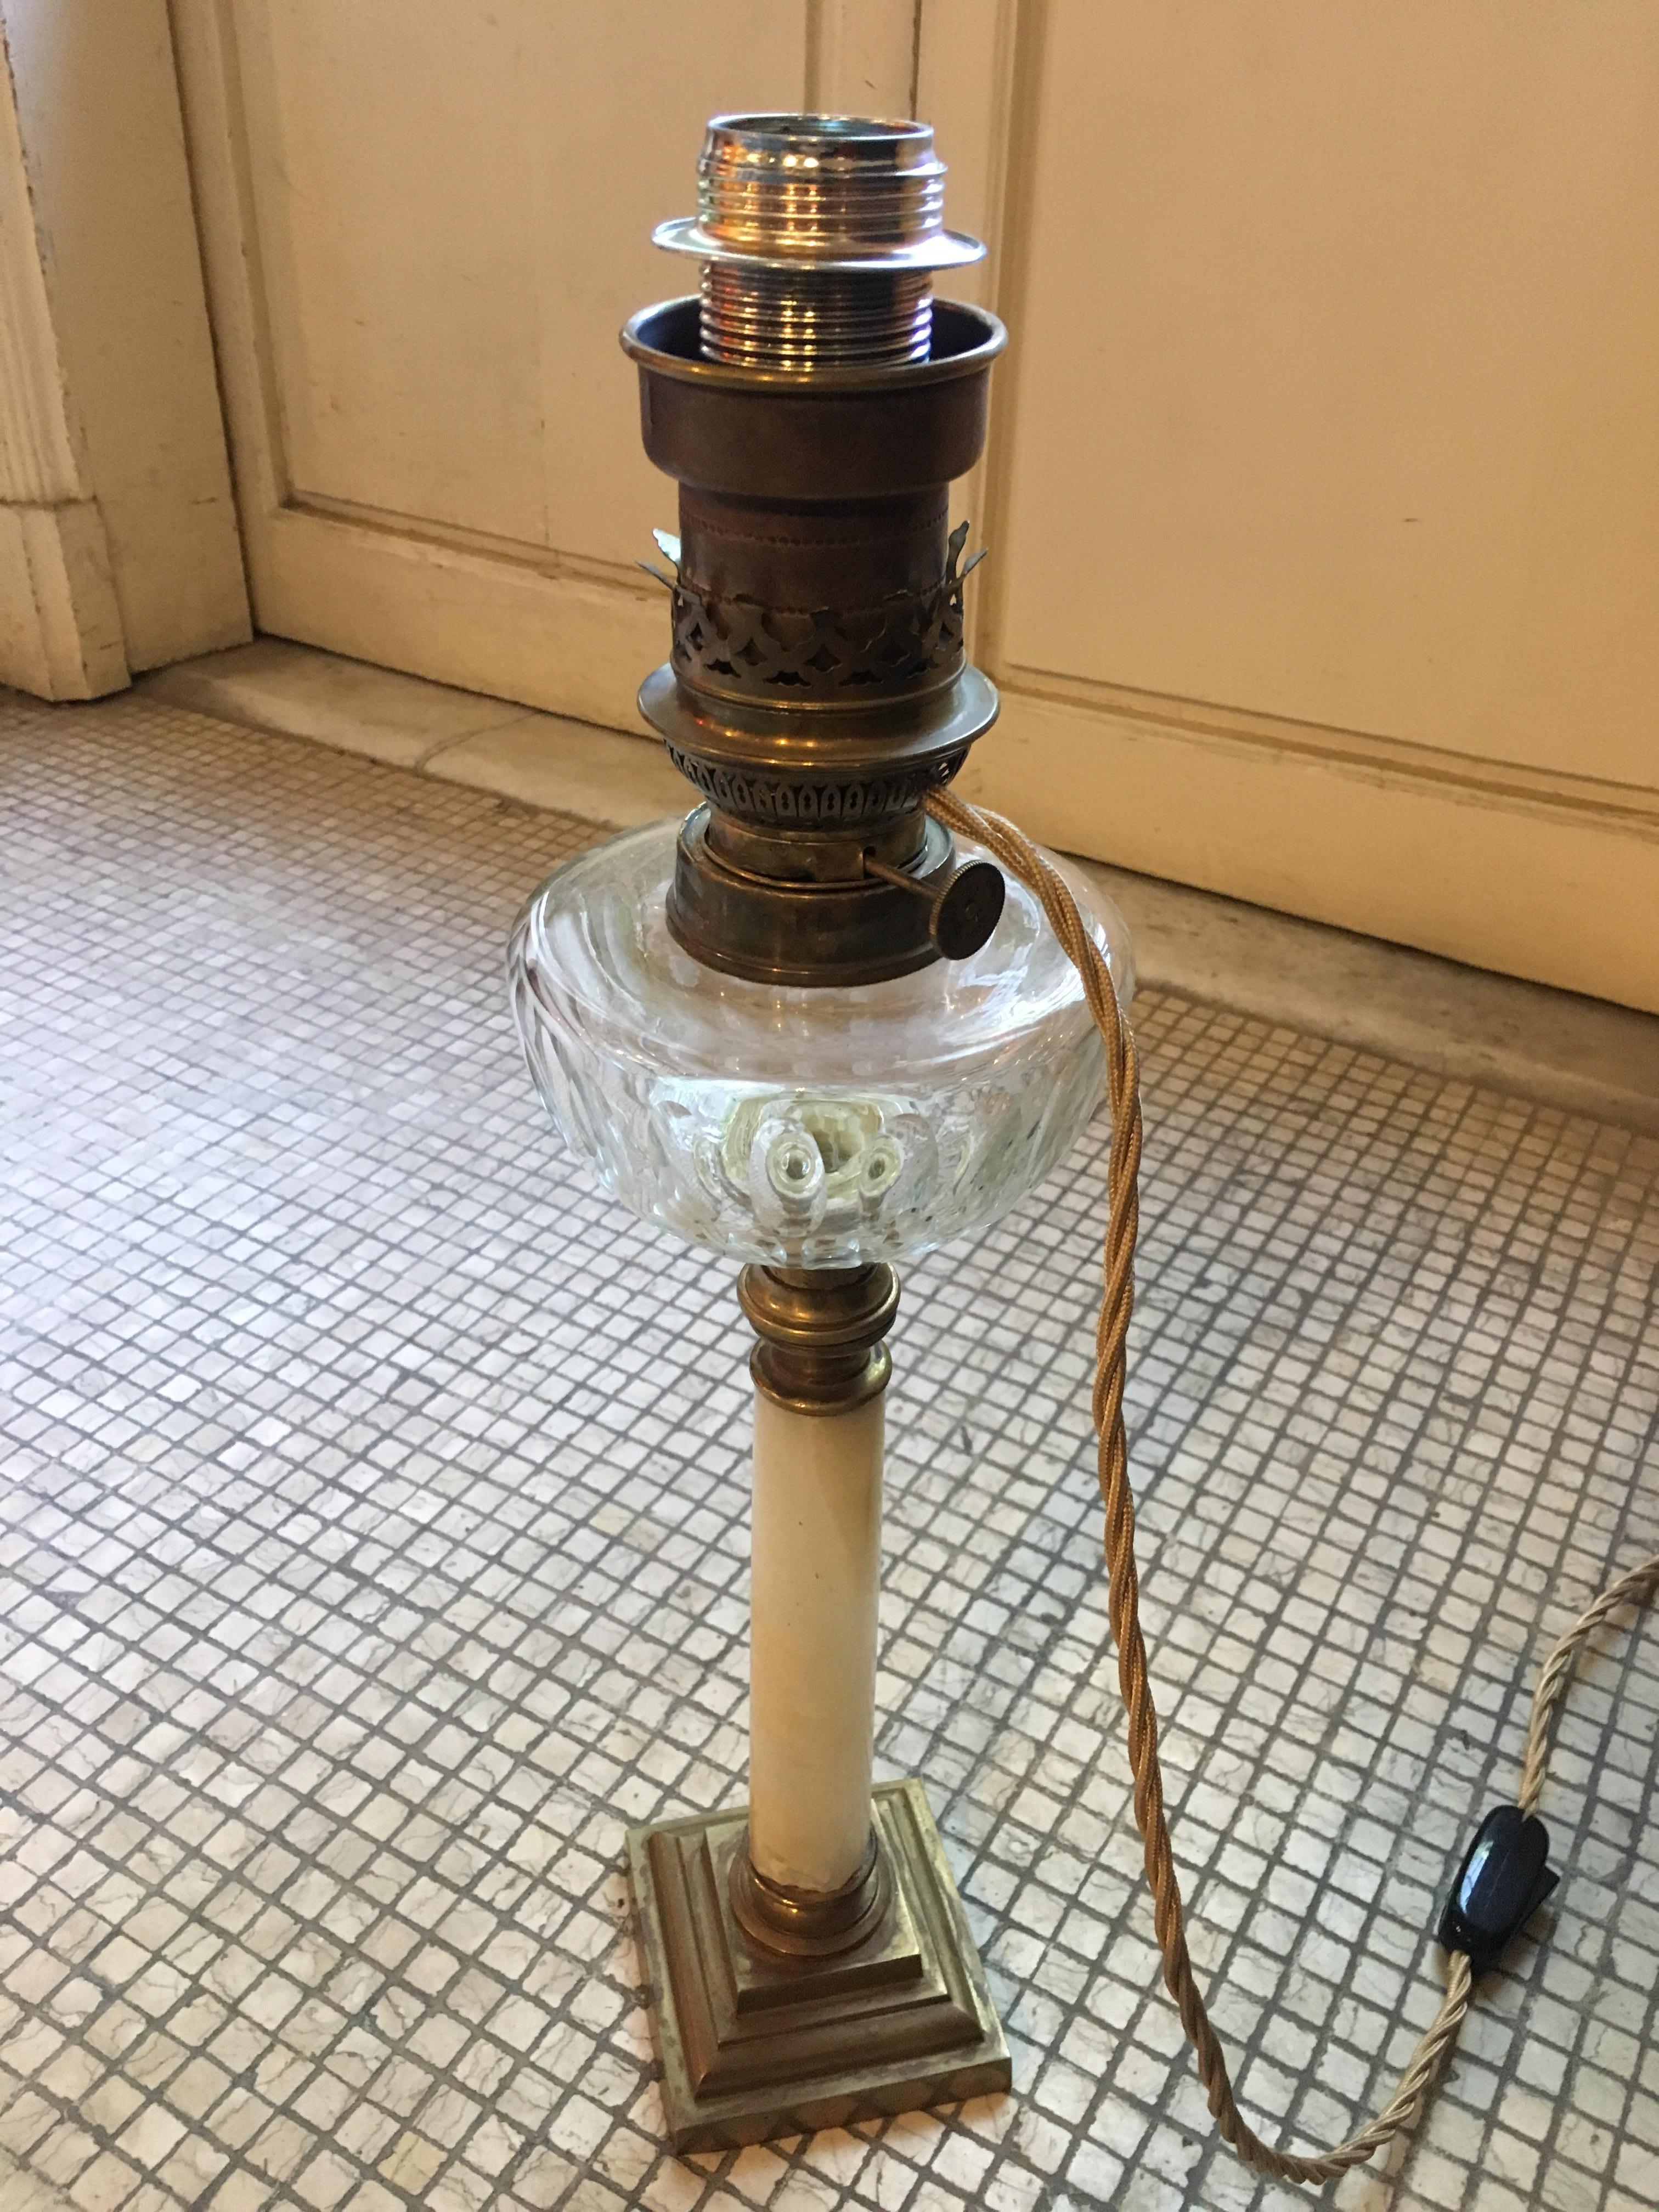 19th century French oil lamp with glass ampoule and marble stem converted into electric lamp, 1890s.
(This lamp has an electrical system according to European legislation).
 